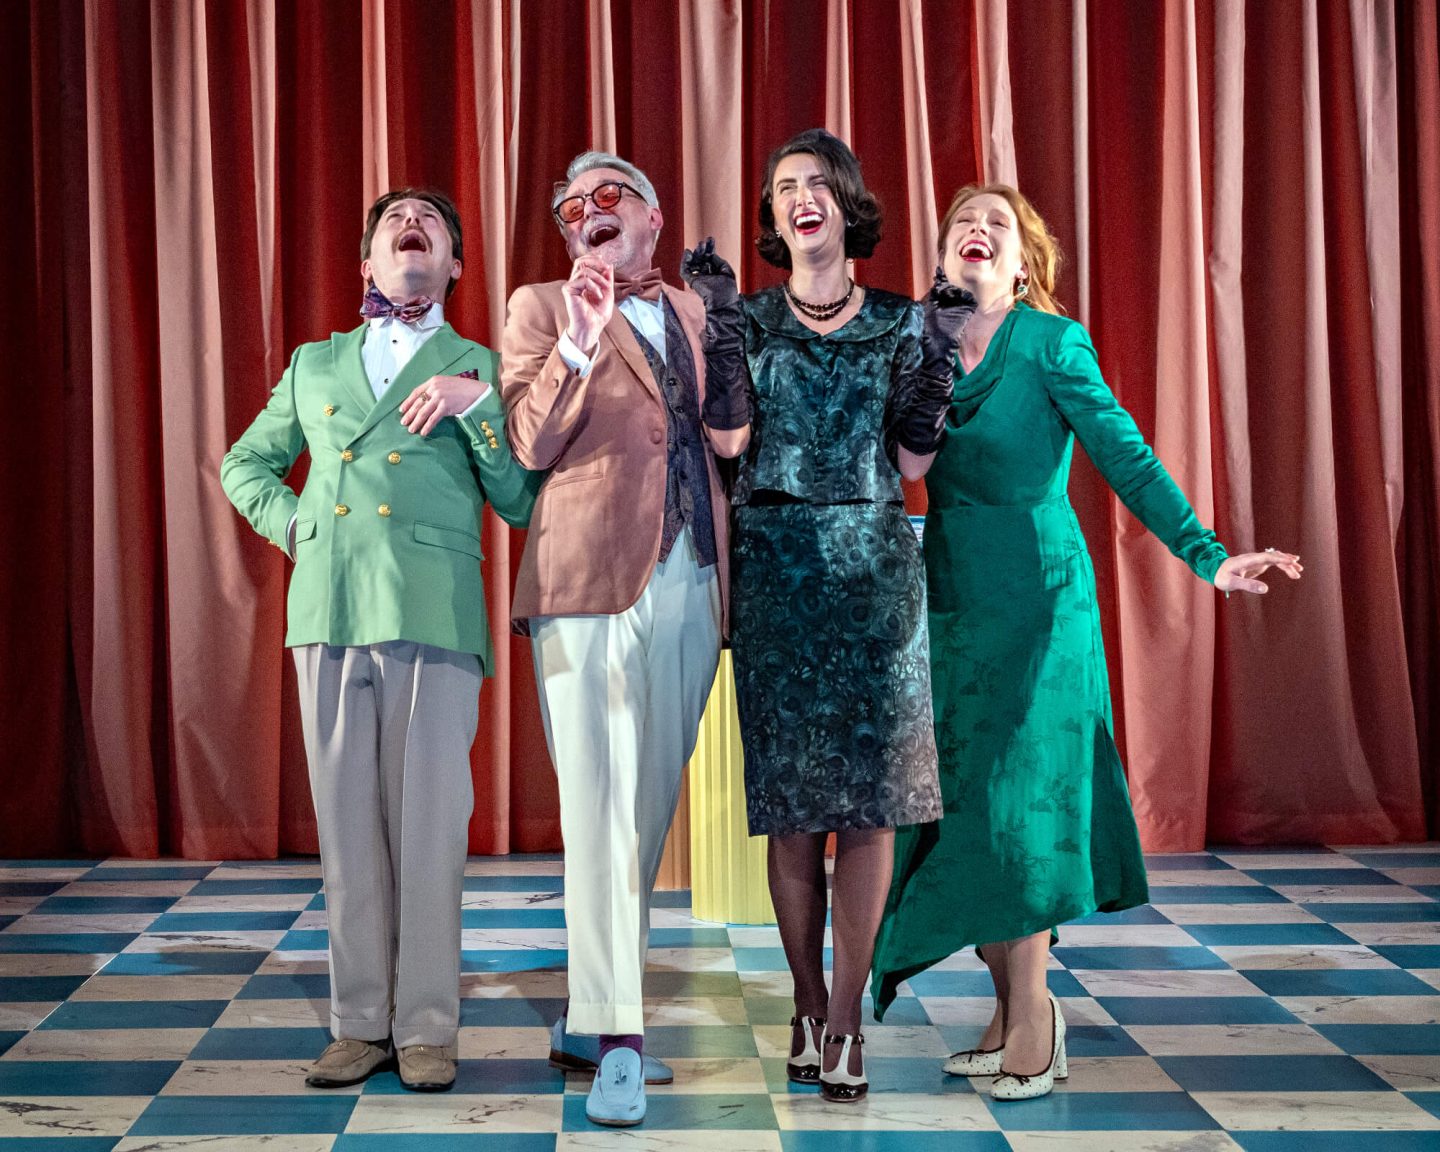 Four members of the School for Scandal cast on stage at Malvern Theatres